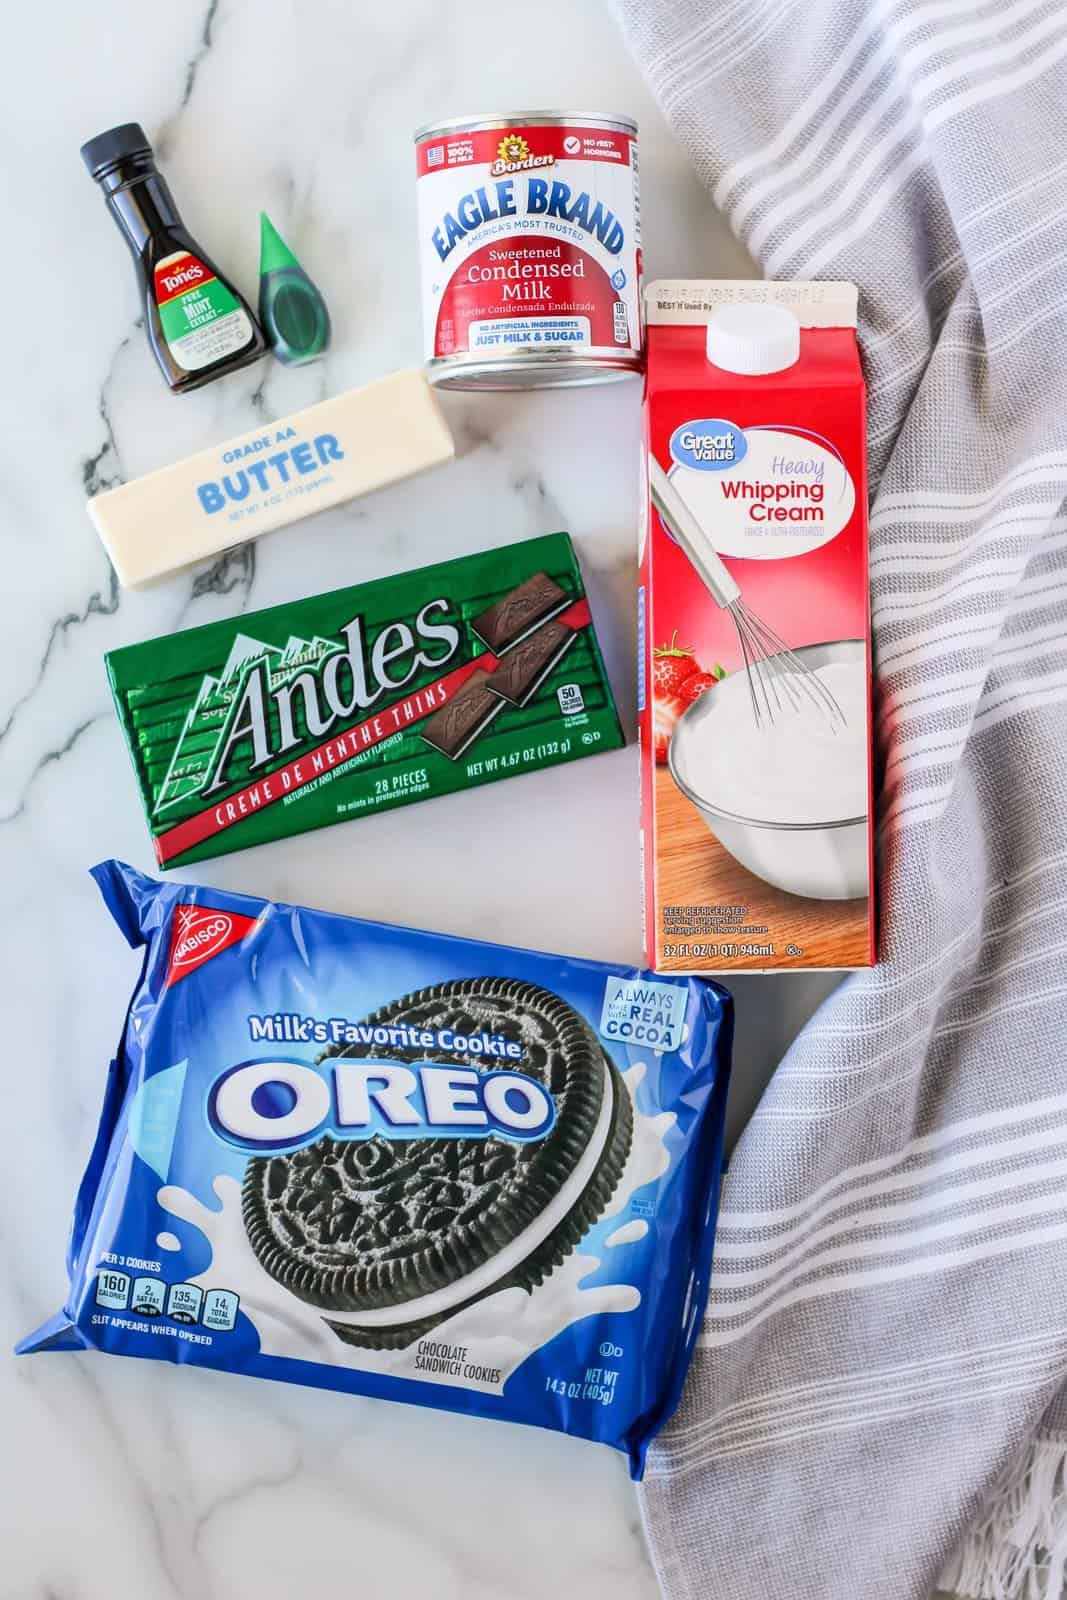 Ingredients needed: unsalted butter, sandwich cookies, heavy whipping cream, sweetened condensed milk, mint extract, green food coloring (optional), chopped mint chocolate.